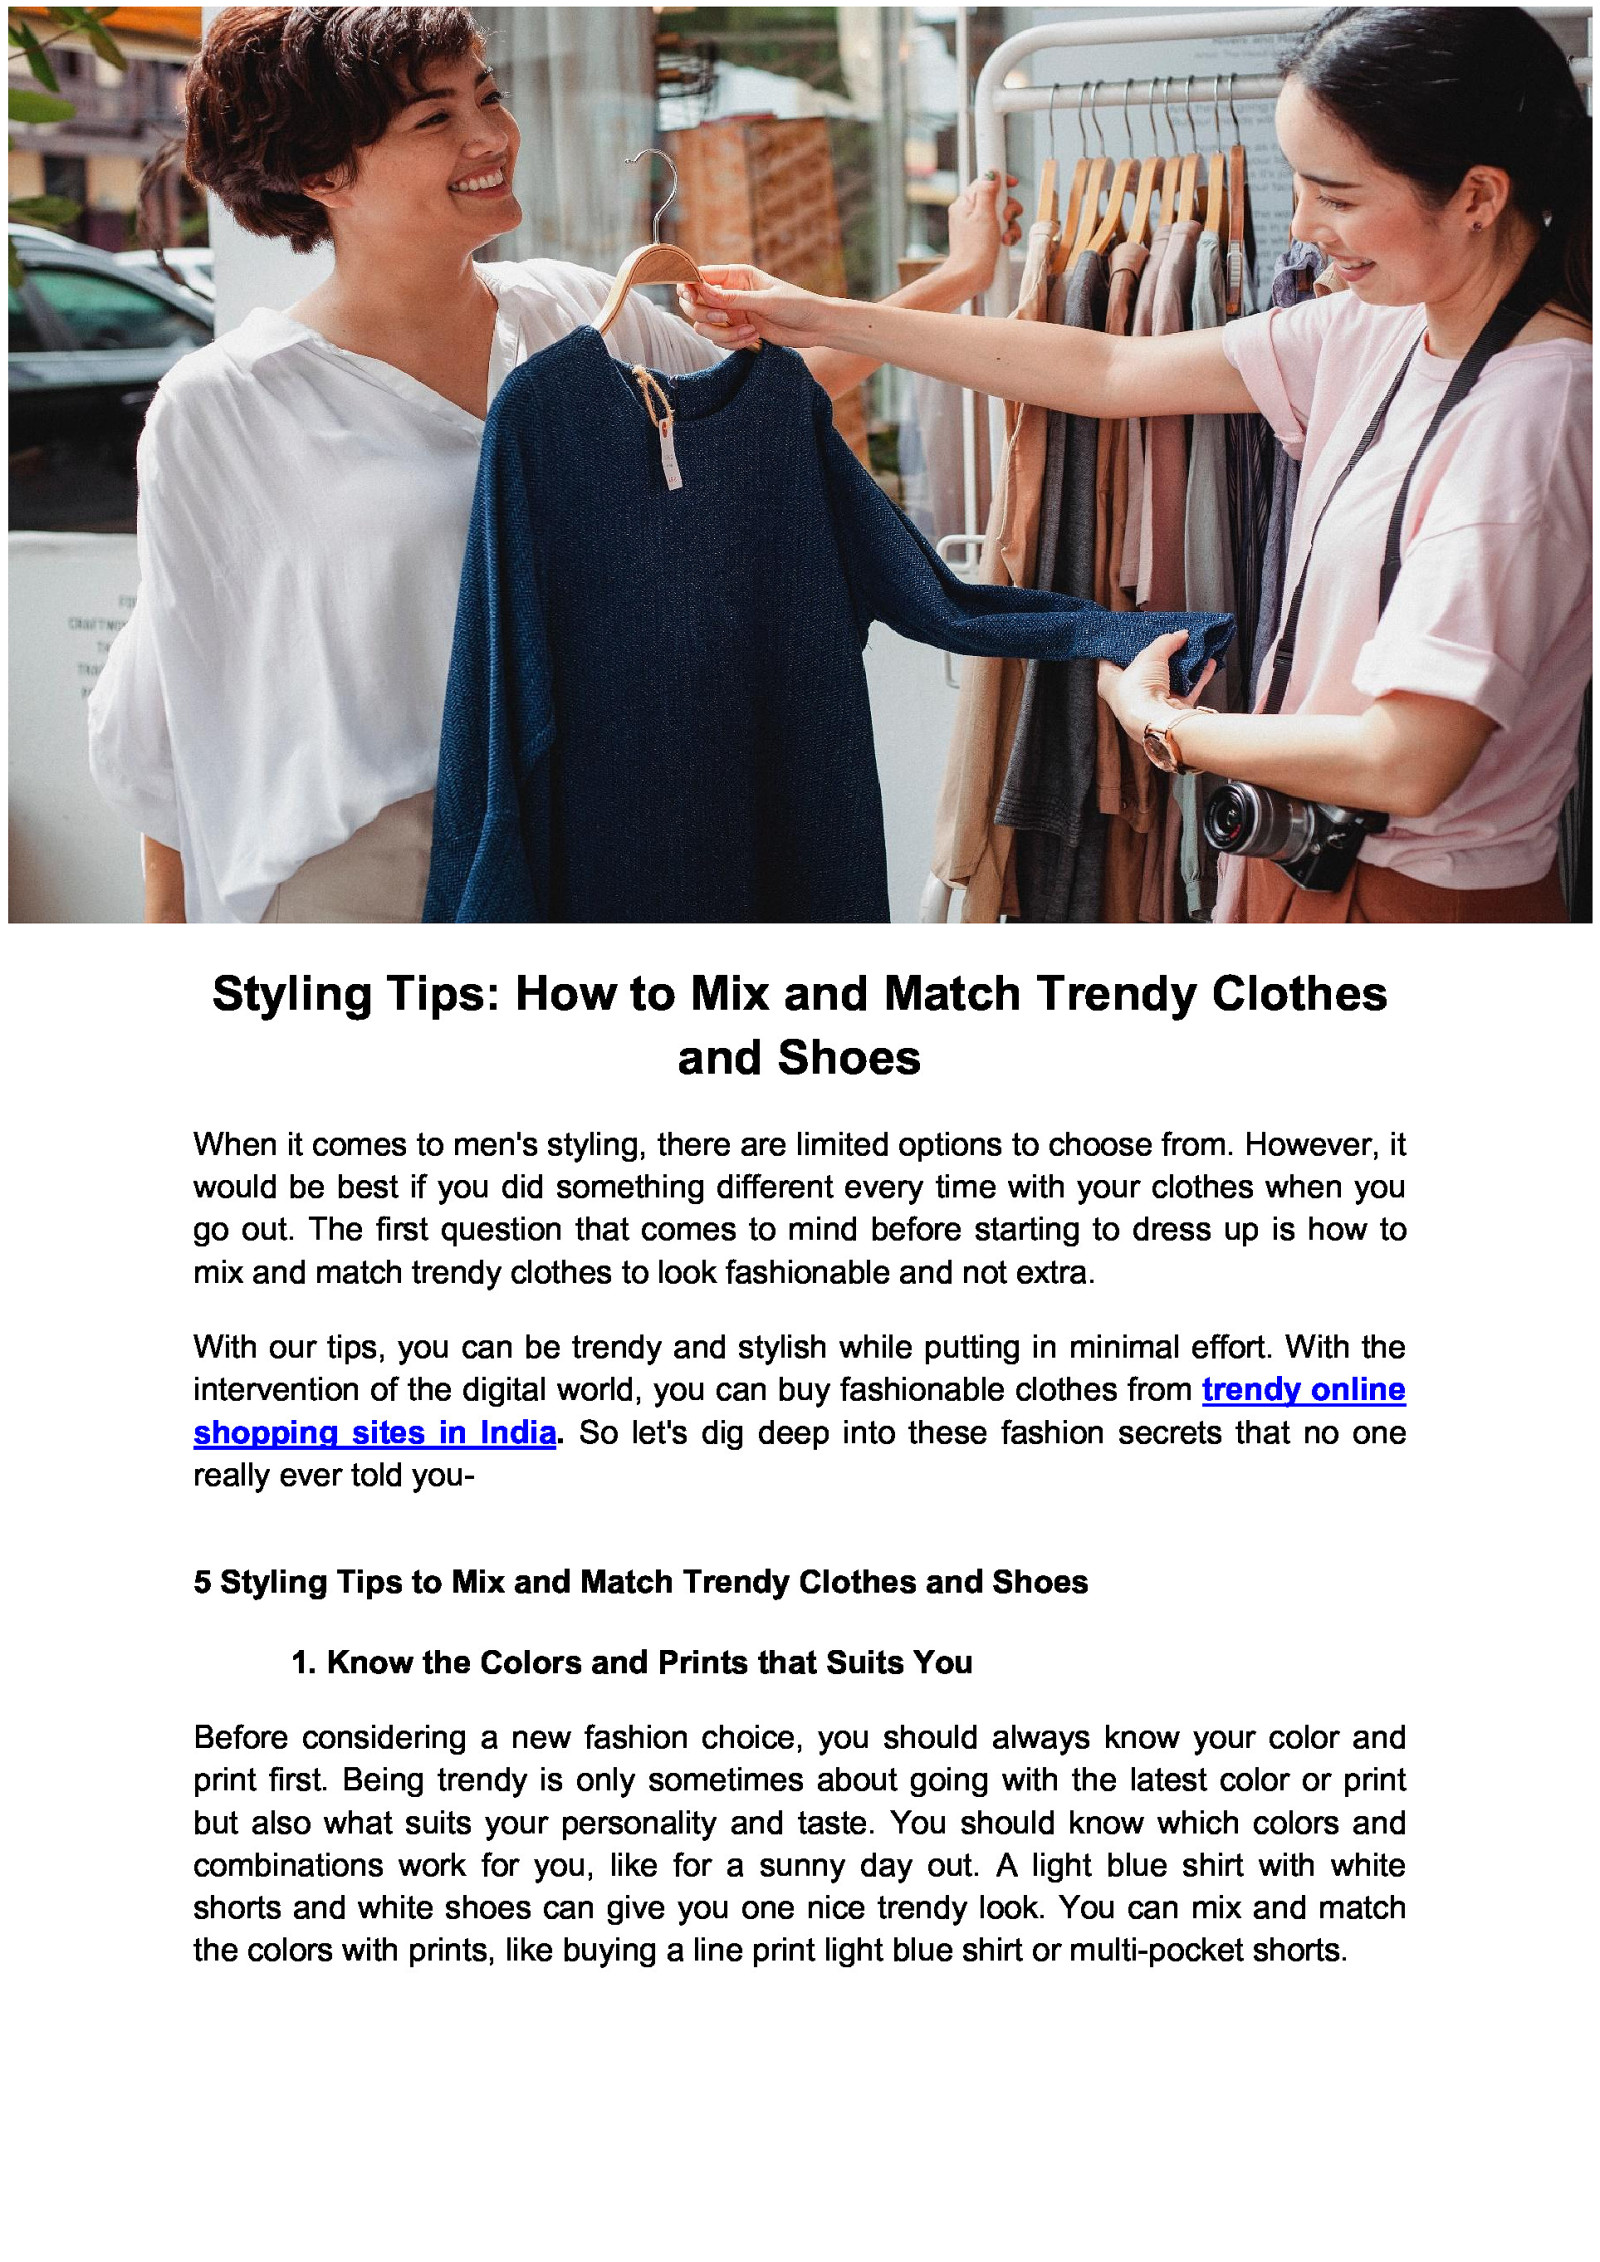 Styling Tips: How to Mix and Match Trendy Clothes and Shoes